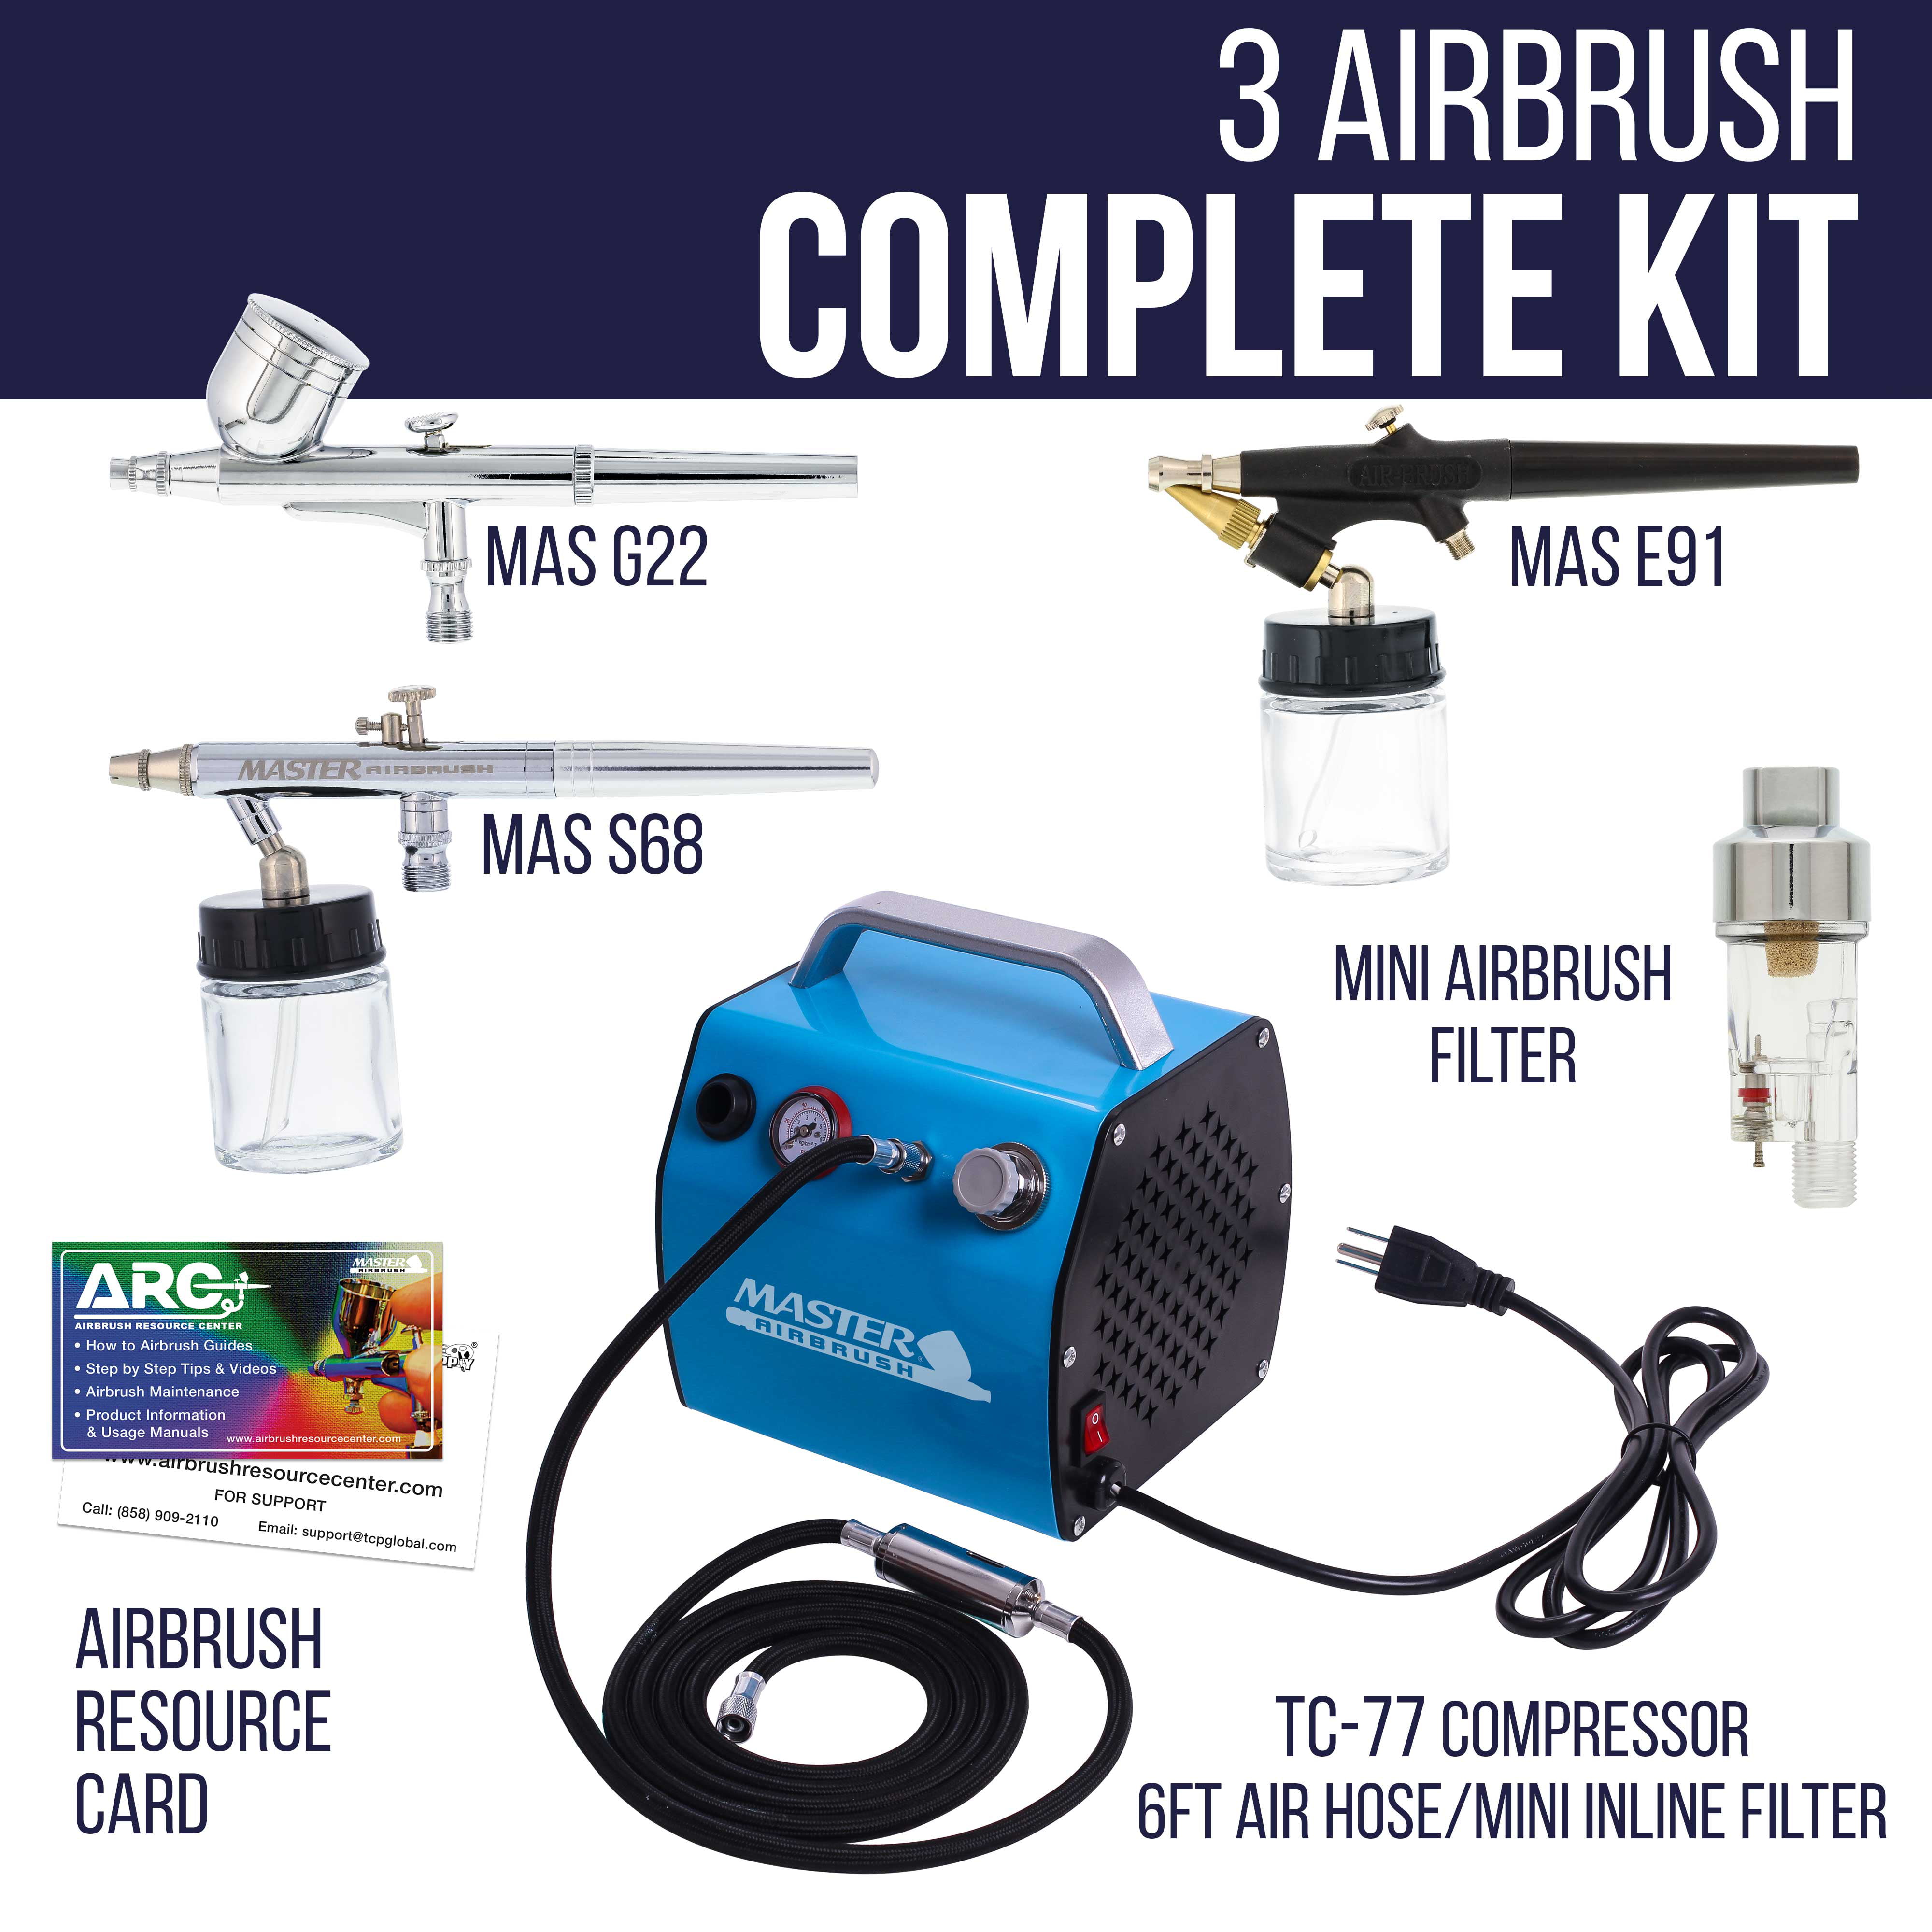 Master G22 airbrush review. One of the most popular airbrushes on  